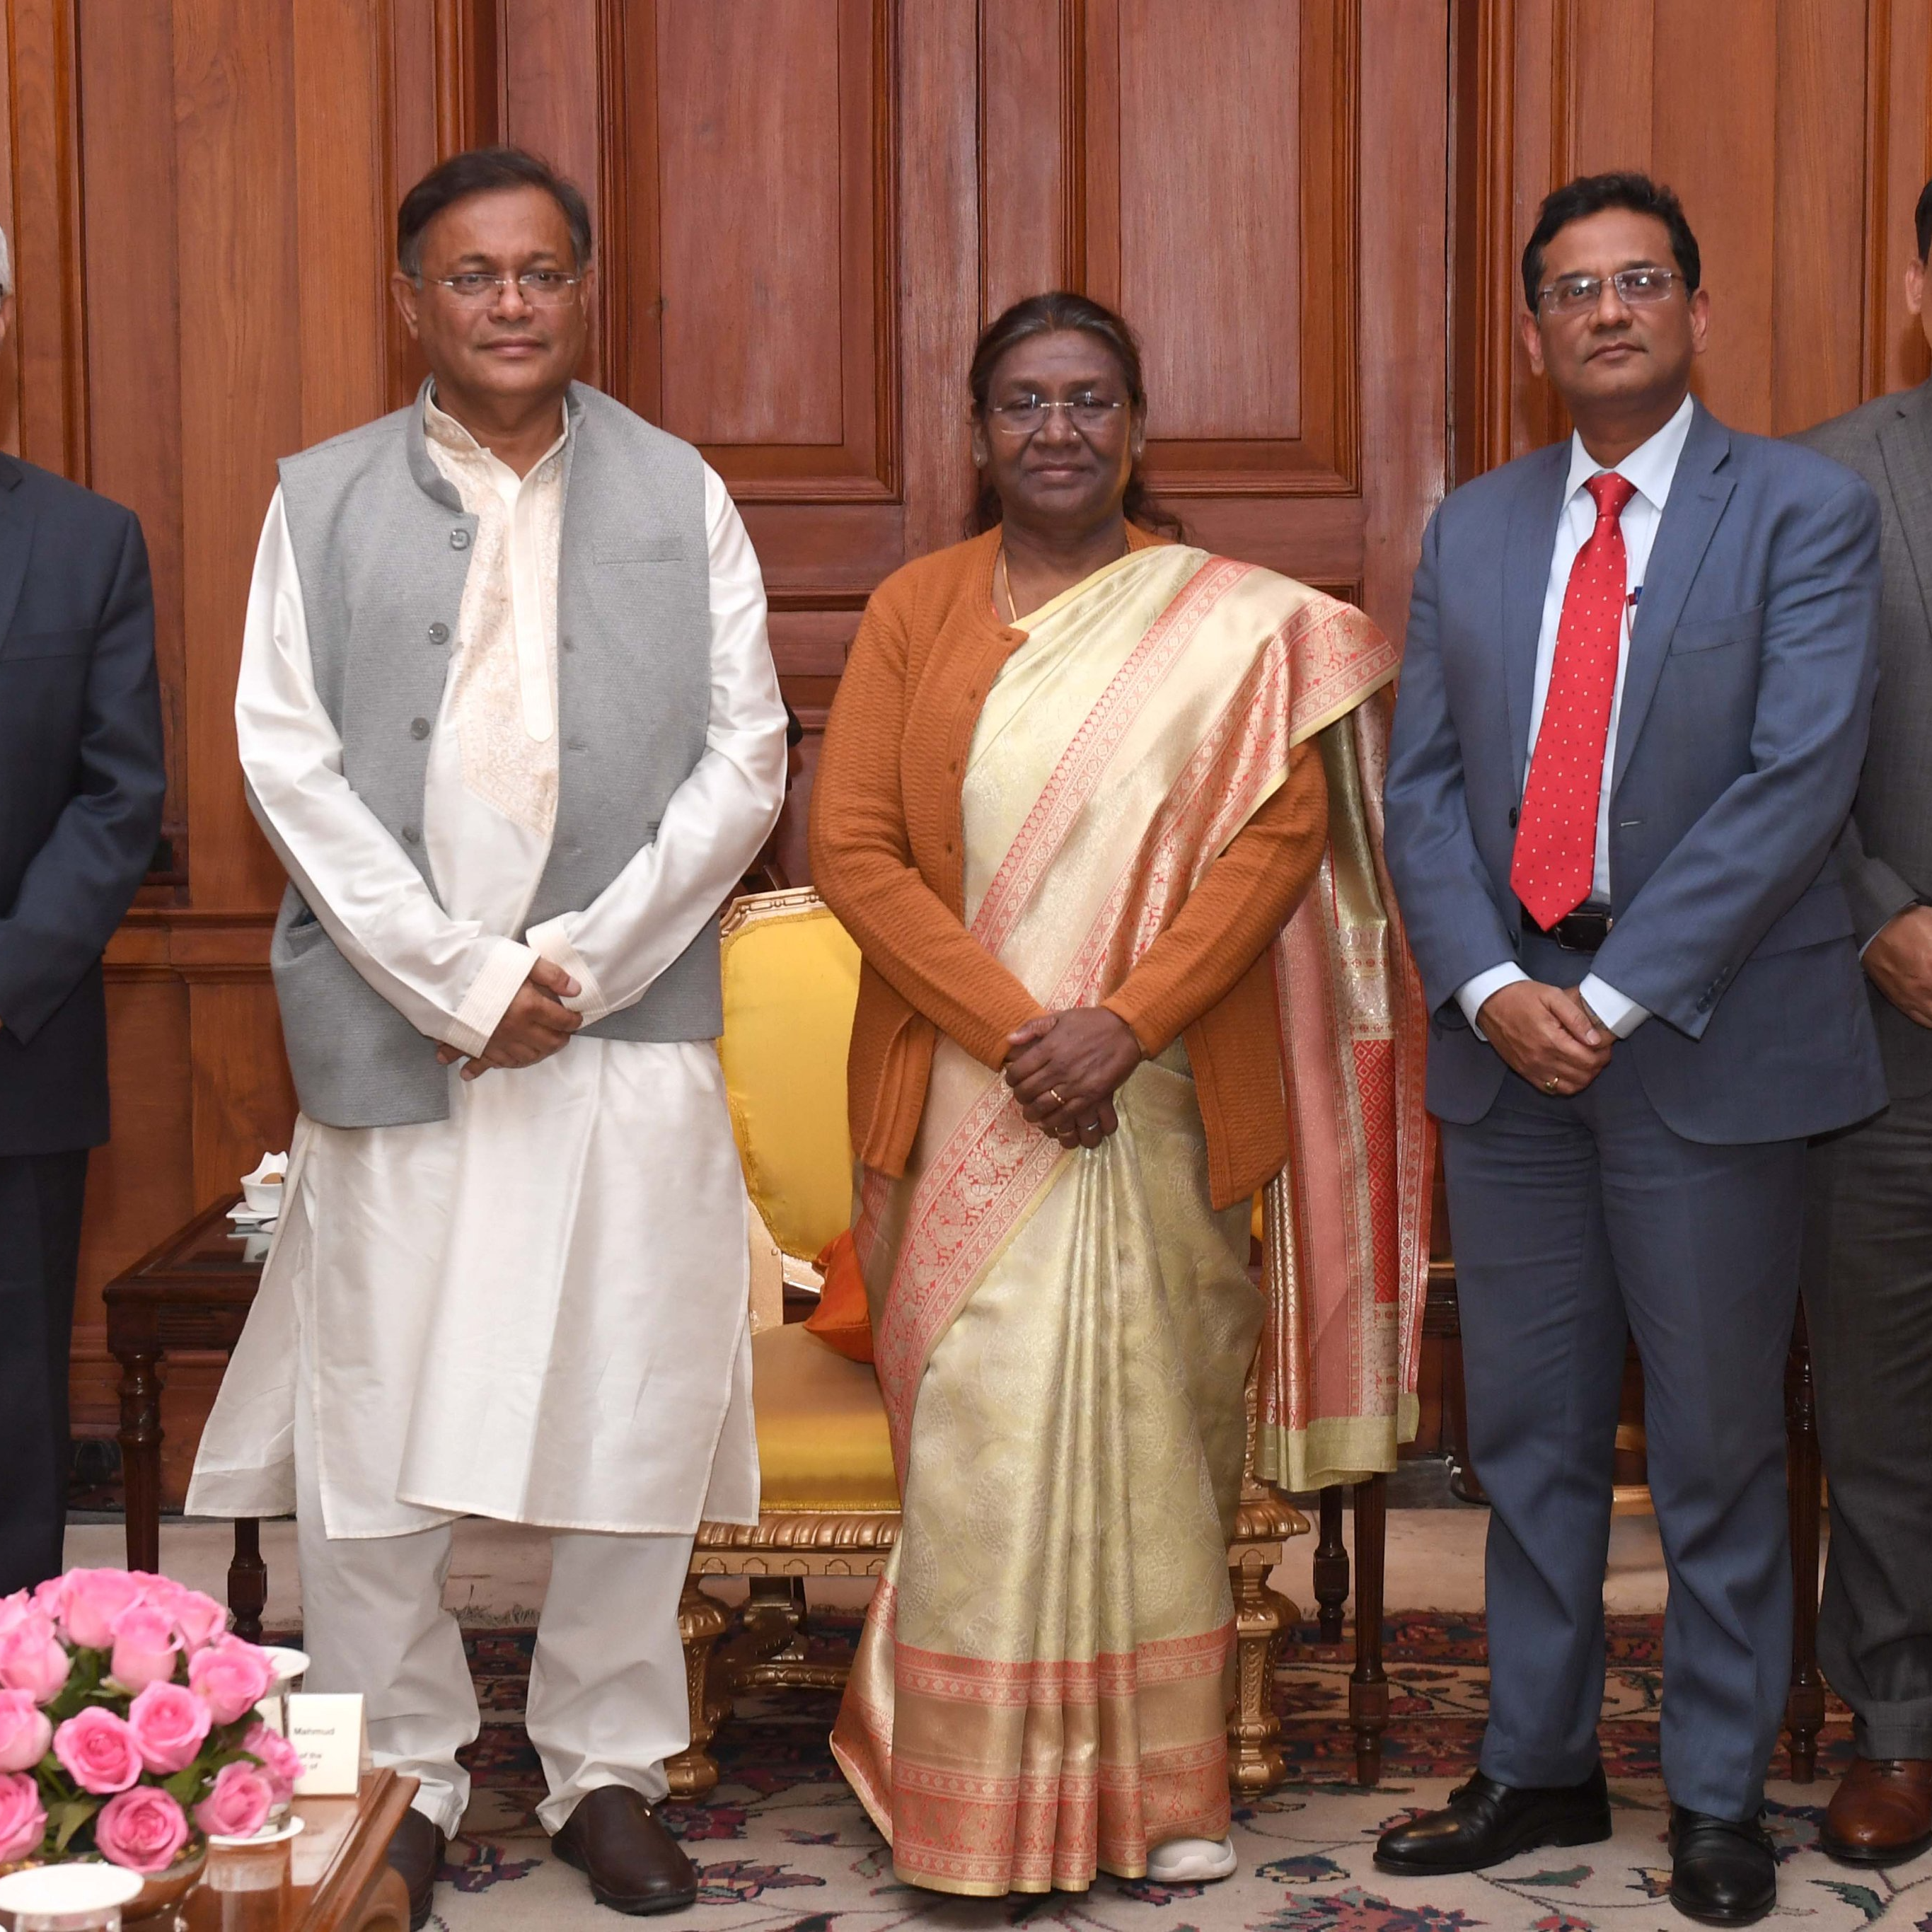 Foreign Minister of Bangladesh calls on the President of India